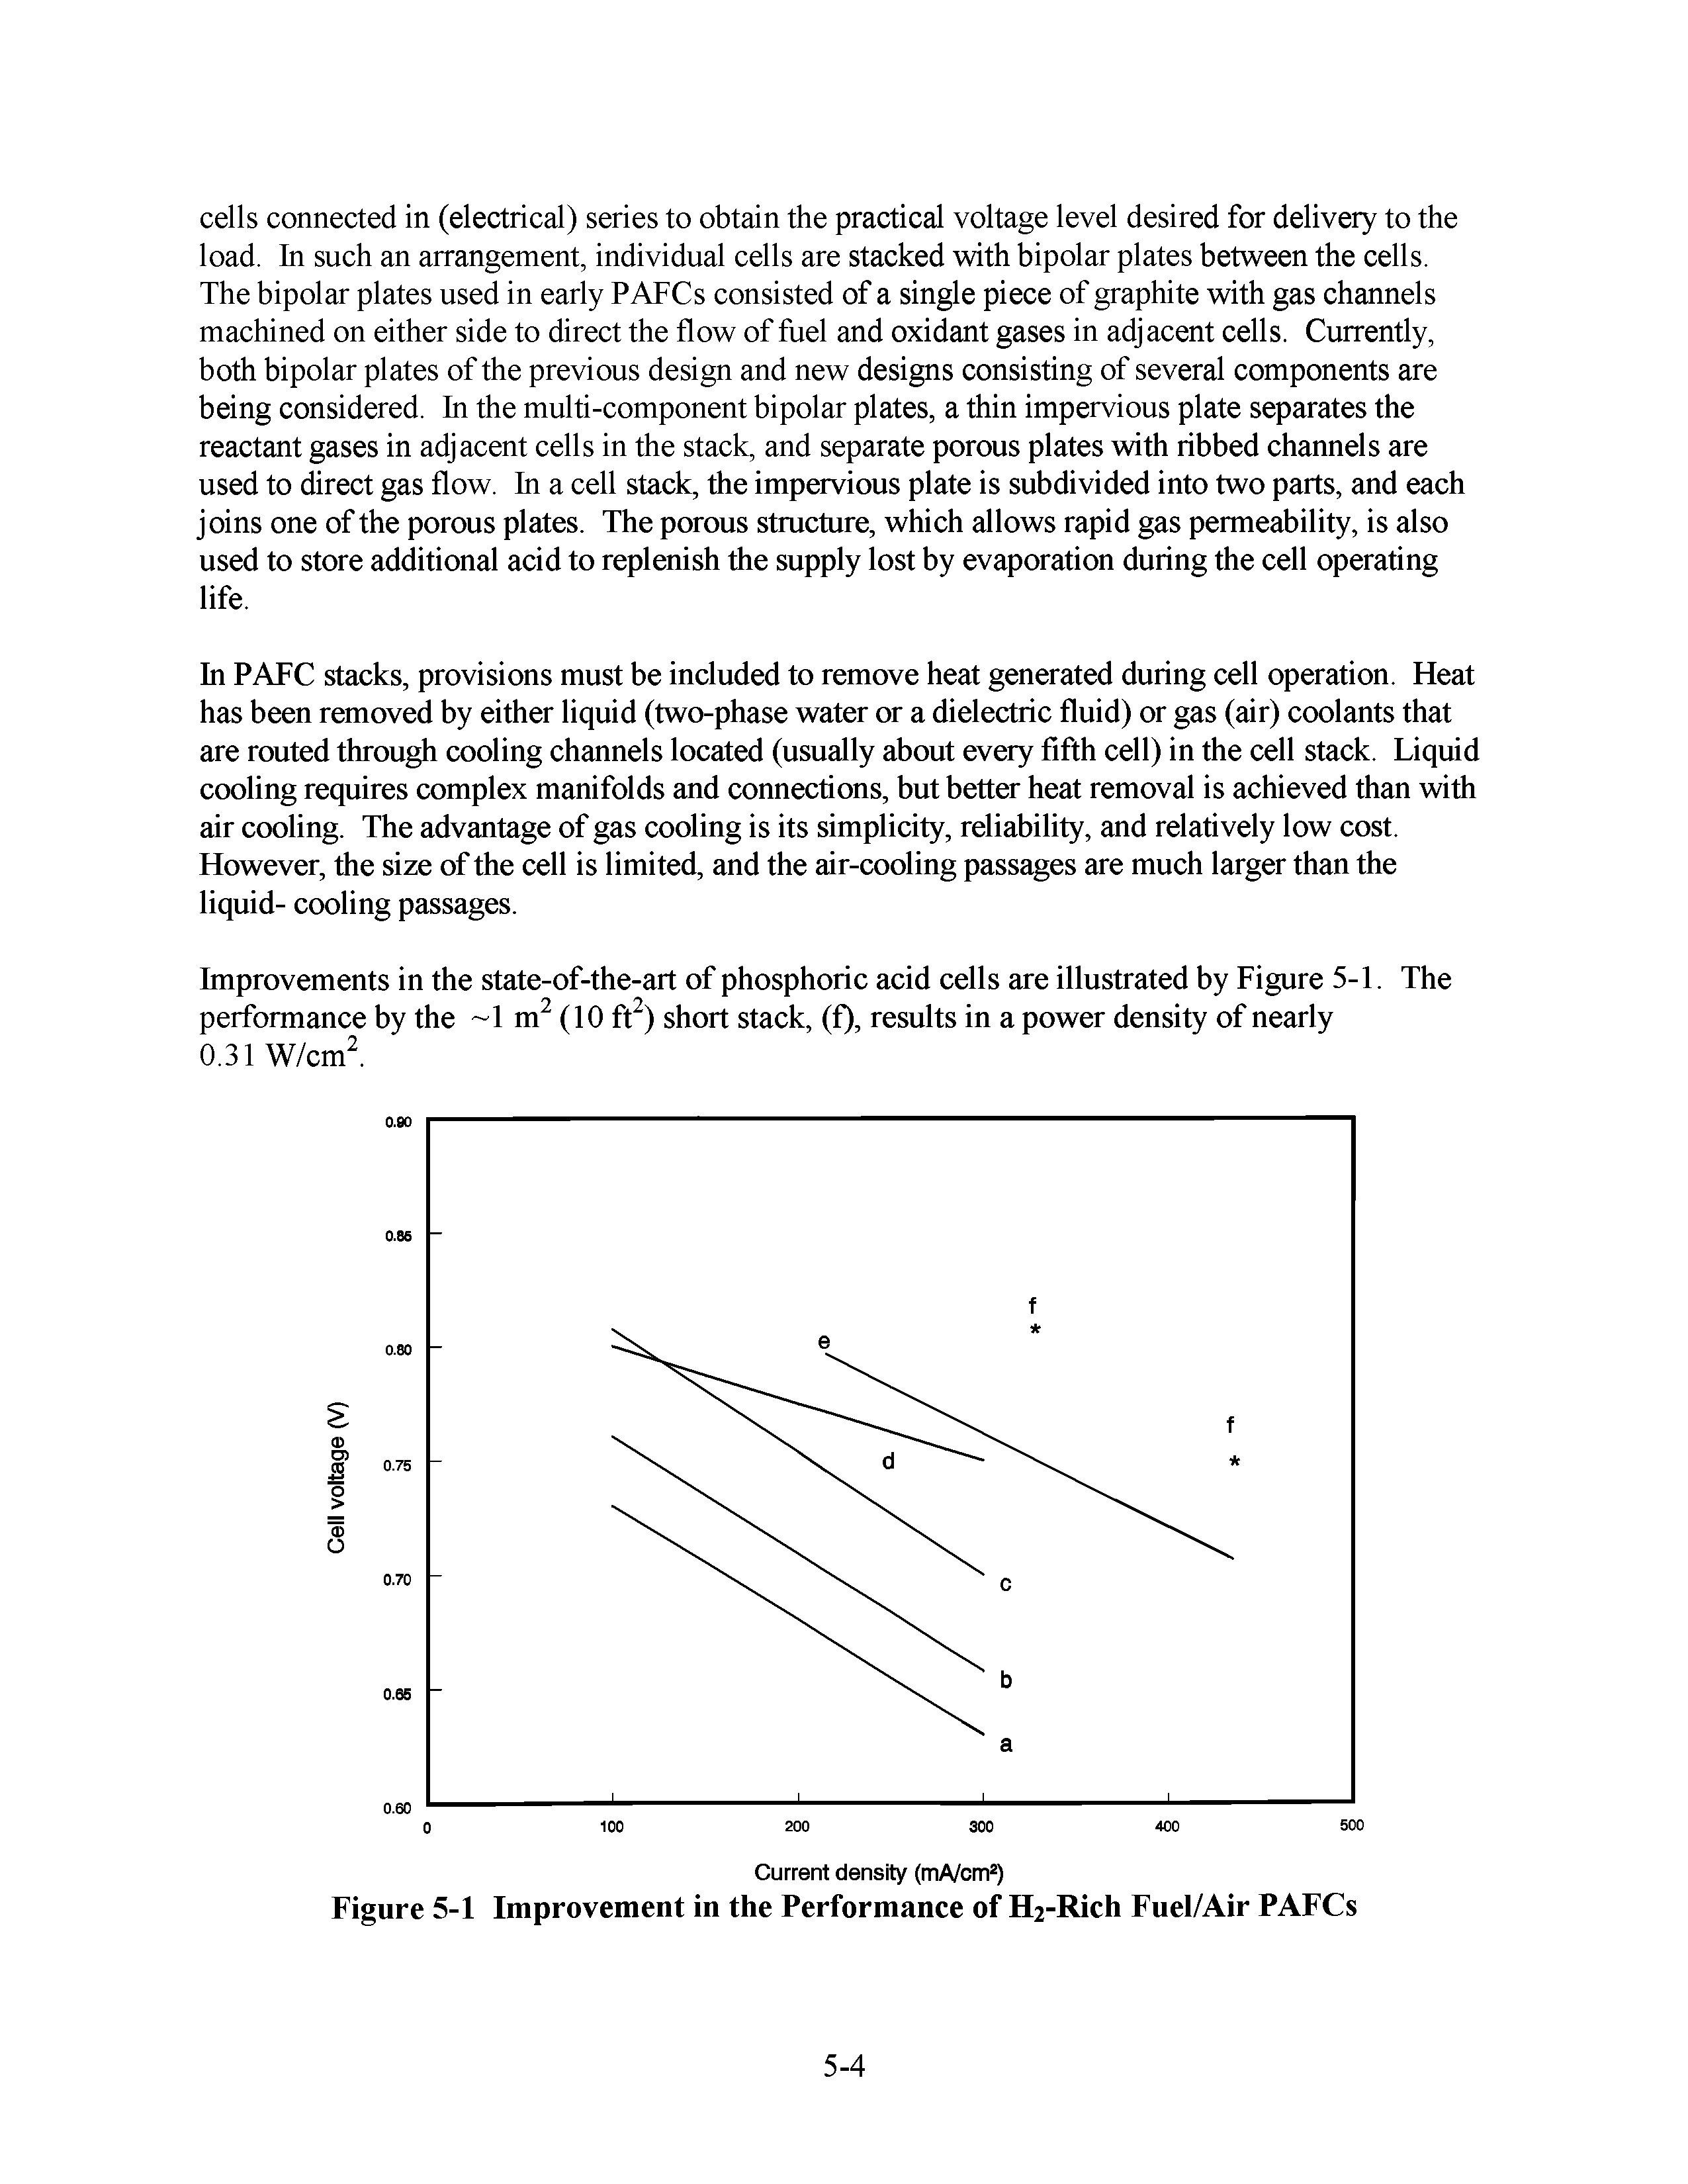 Figure 5-1 Improvement in the Performance of Hi-Rich Fuel/Air PAFCs...